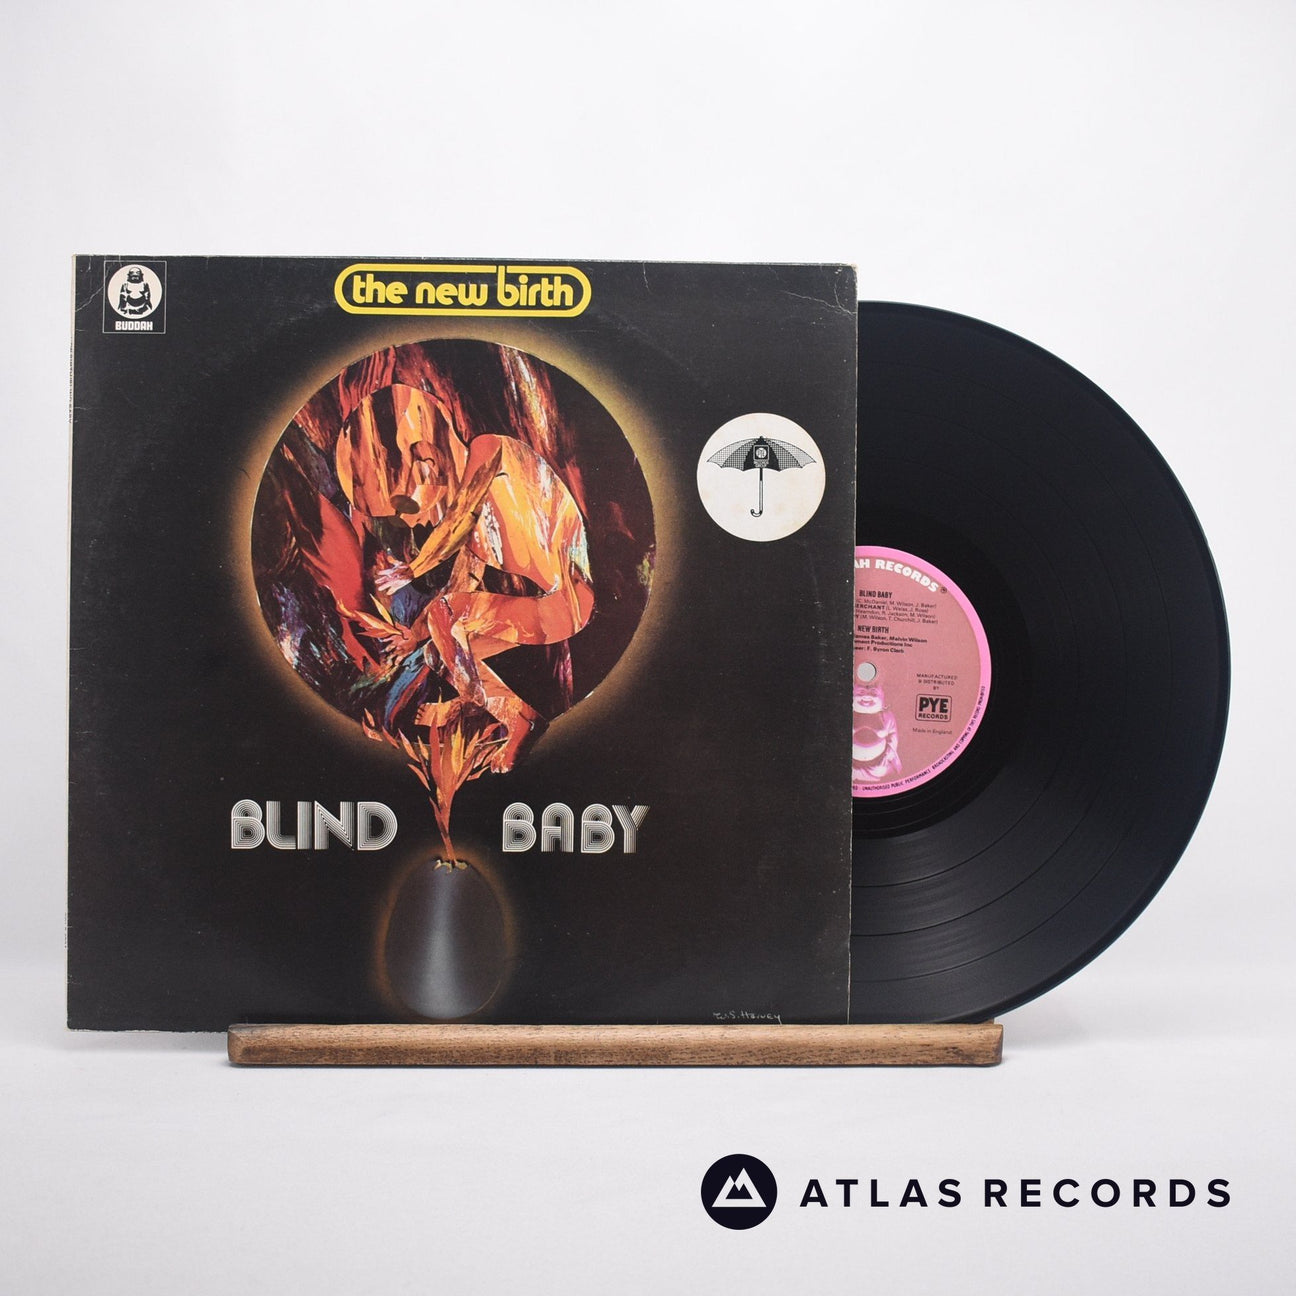 New Birth Blind Baby LP Vinyl Record - Front Cover & Record